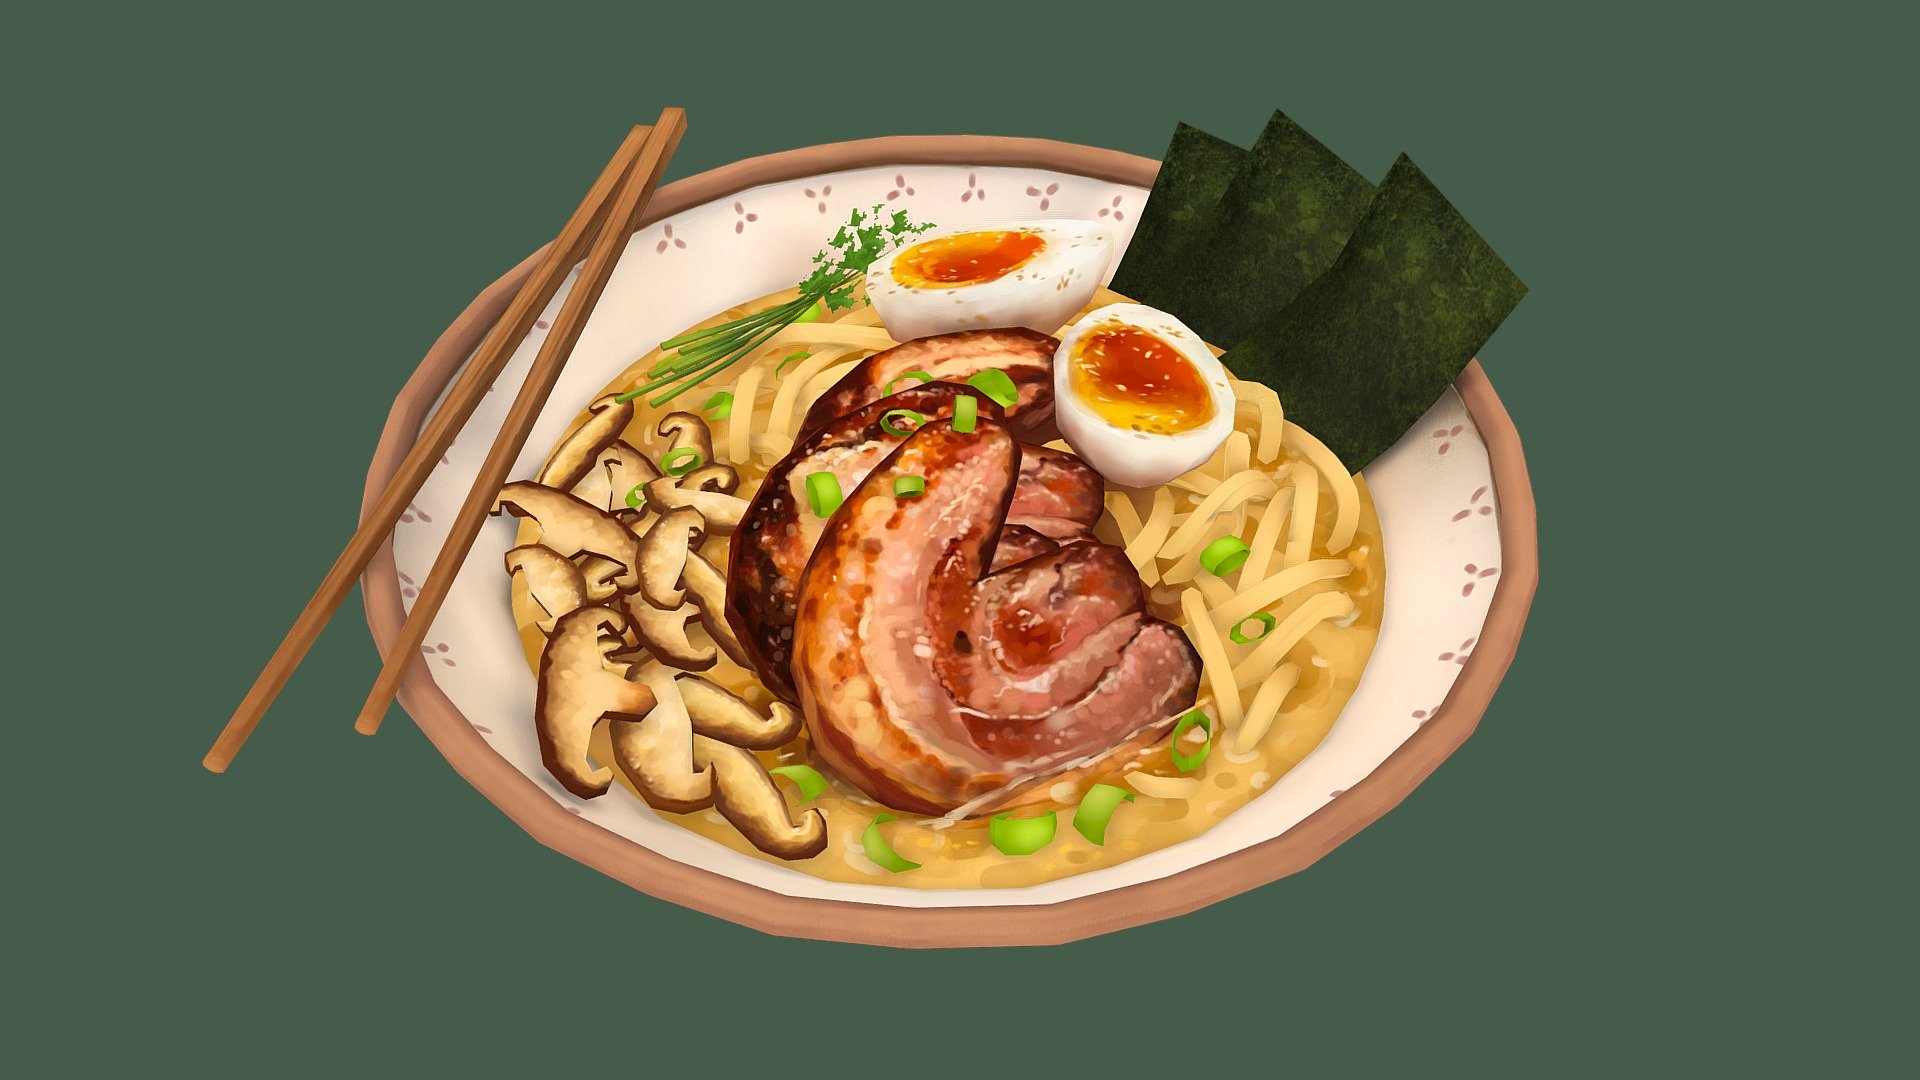 Really wanted to paint some food, so here's a bowl of one of my favorites - tonkotsu ramen!

Modeled in 3dsMax, fully handpainted in 3DCoat and Photoshop. I additionally baked then erased some AO to help enhance some forms while still maintaining most of the original handpainted diffuse 3d model